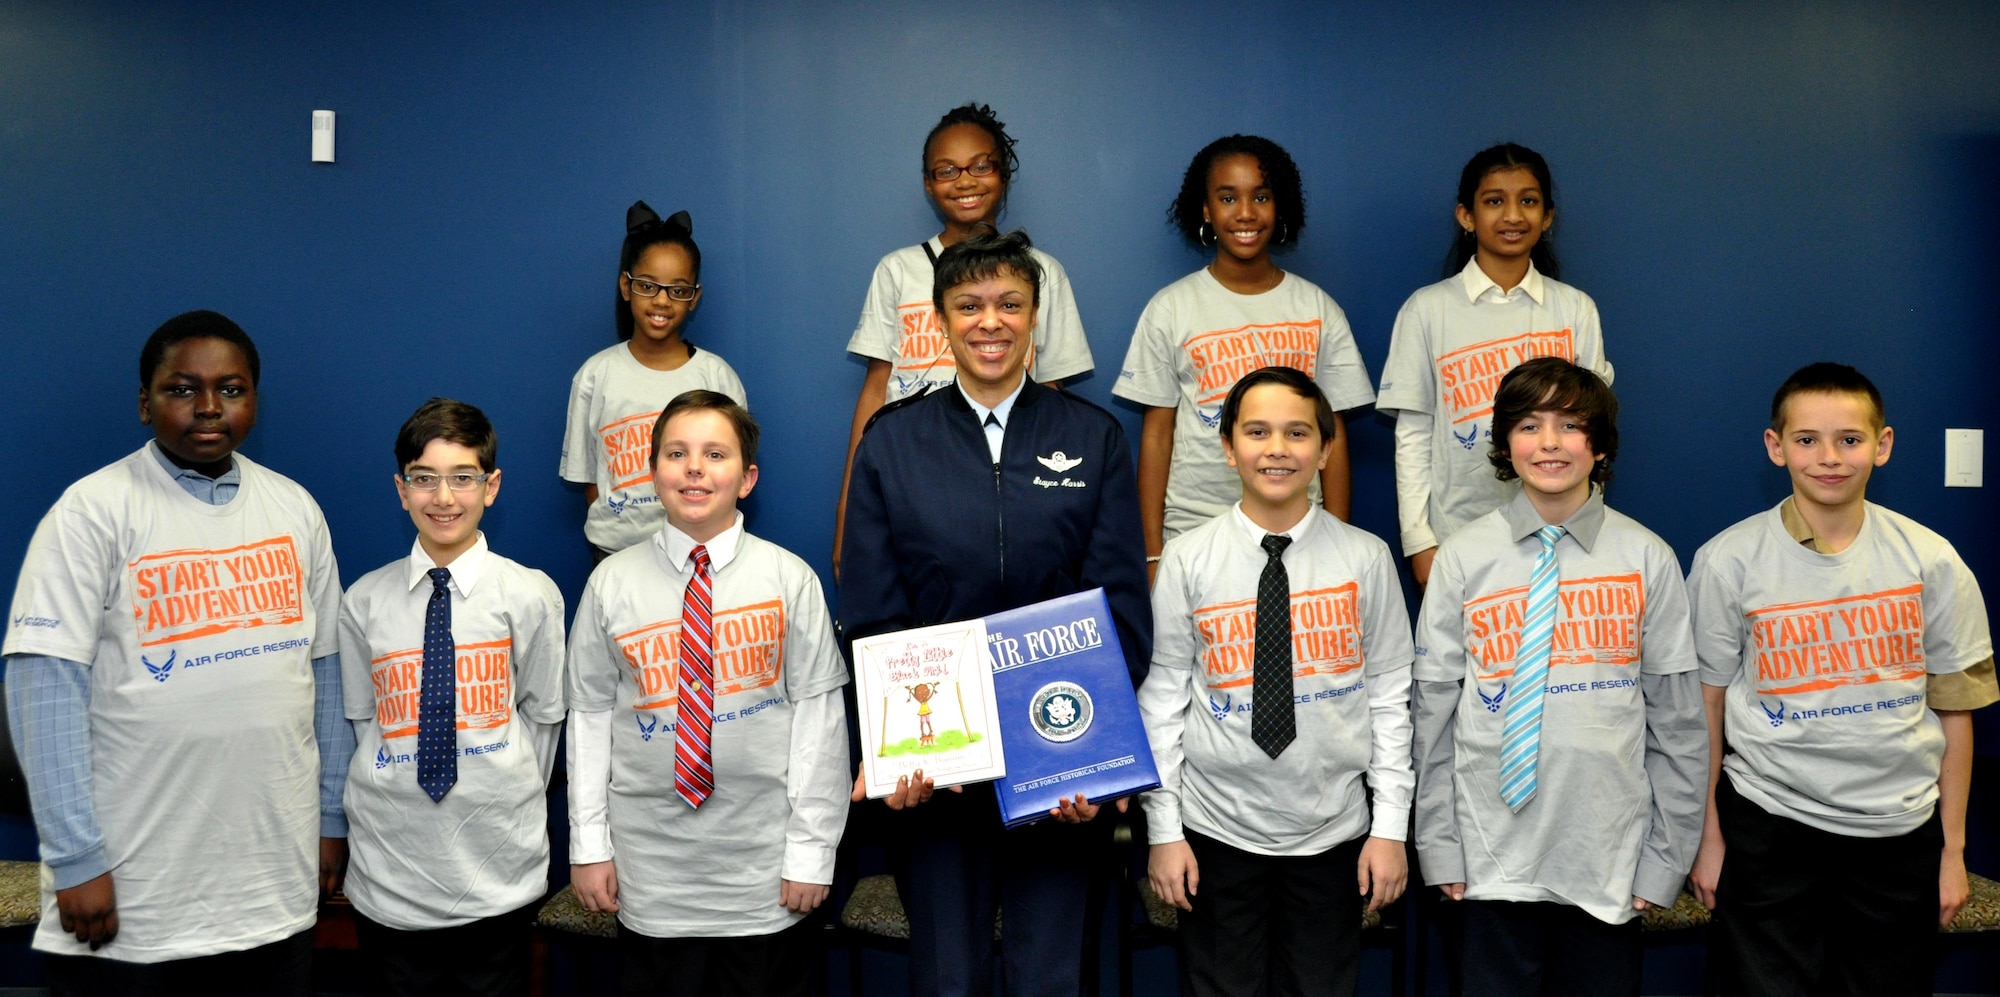 Maj. Gen. Stayce Harris, 22nd Air Force commander, poses for a photo with students from Bright Star Elementary in Douglasville, Ga. at the 22nd AF headquarters at Dobbins Air Reserve Base, Ga., Feb. 7, 2015. Ten students from Bright Star visited the installation to interview Harris for Black History month. (U.S. Air Force photo/Senior Airman Daniel Phelps)